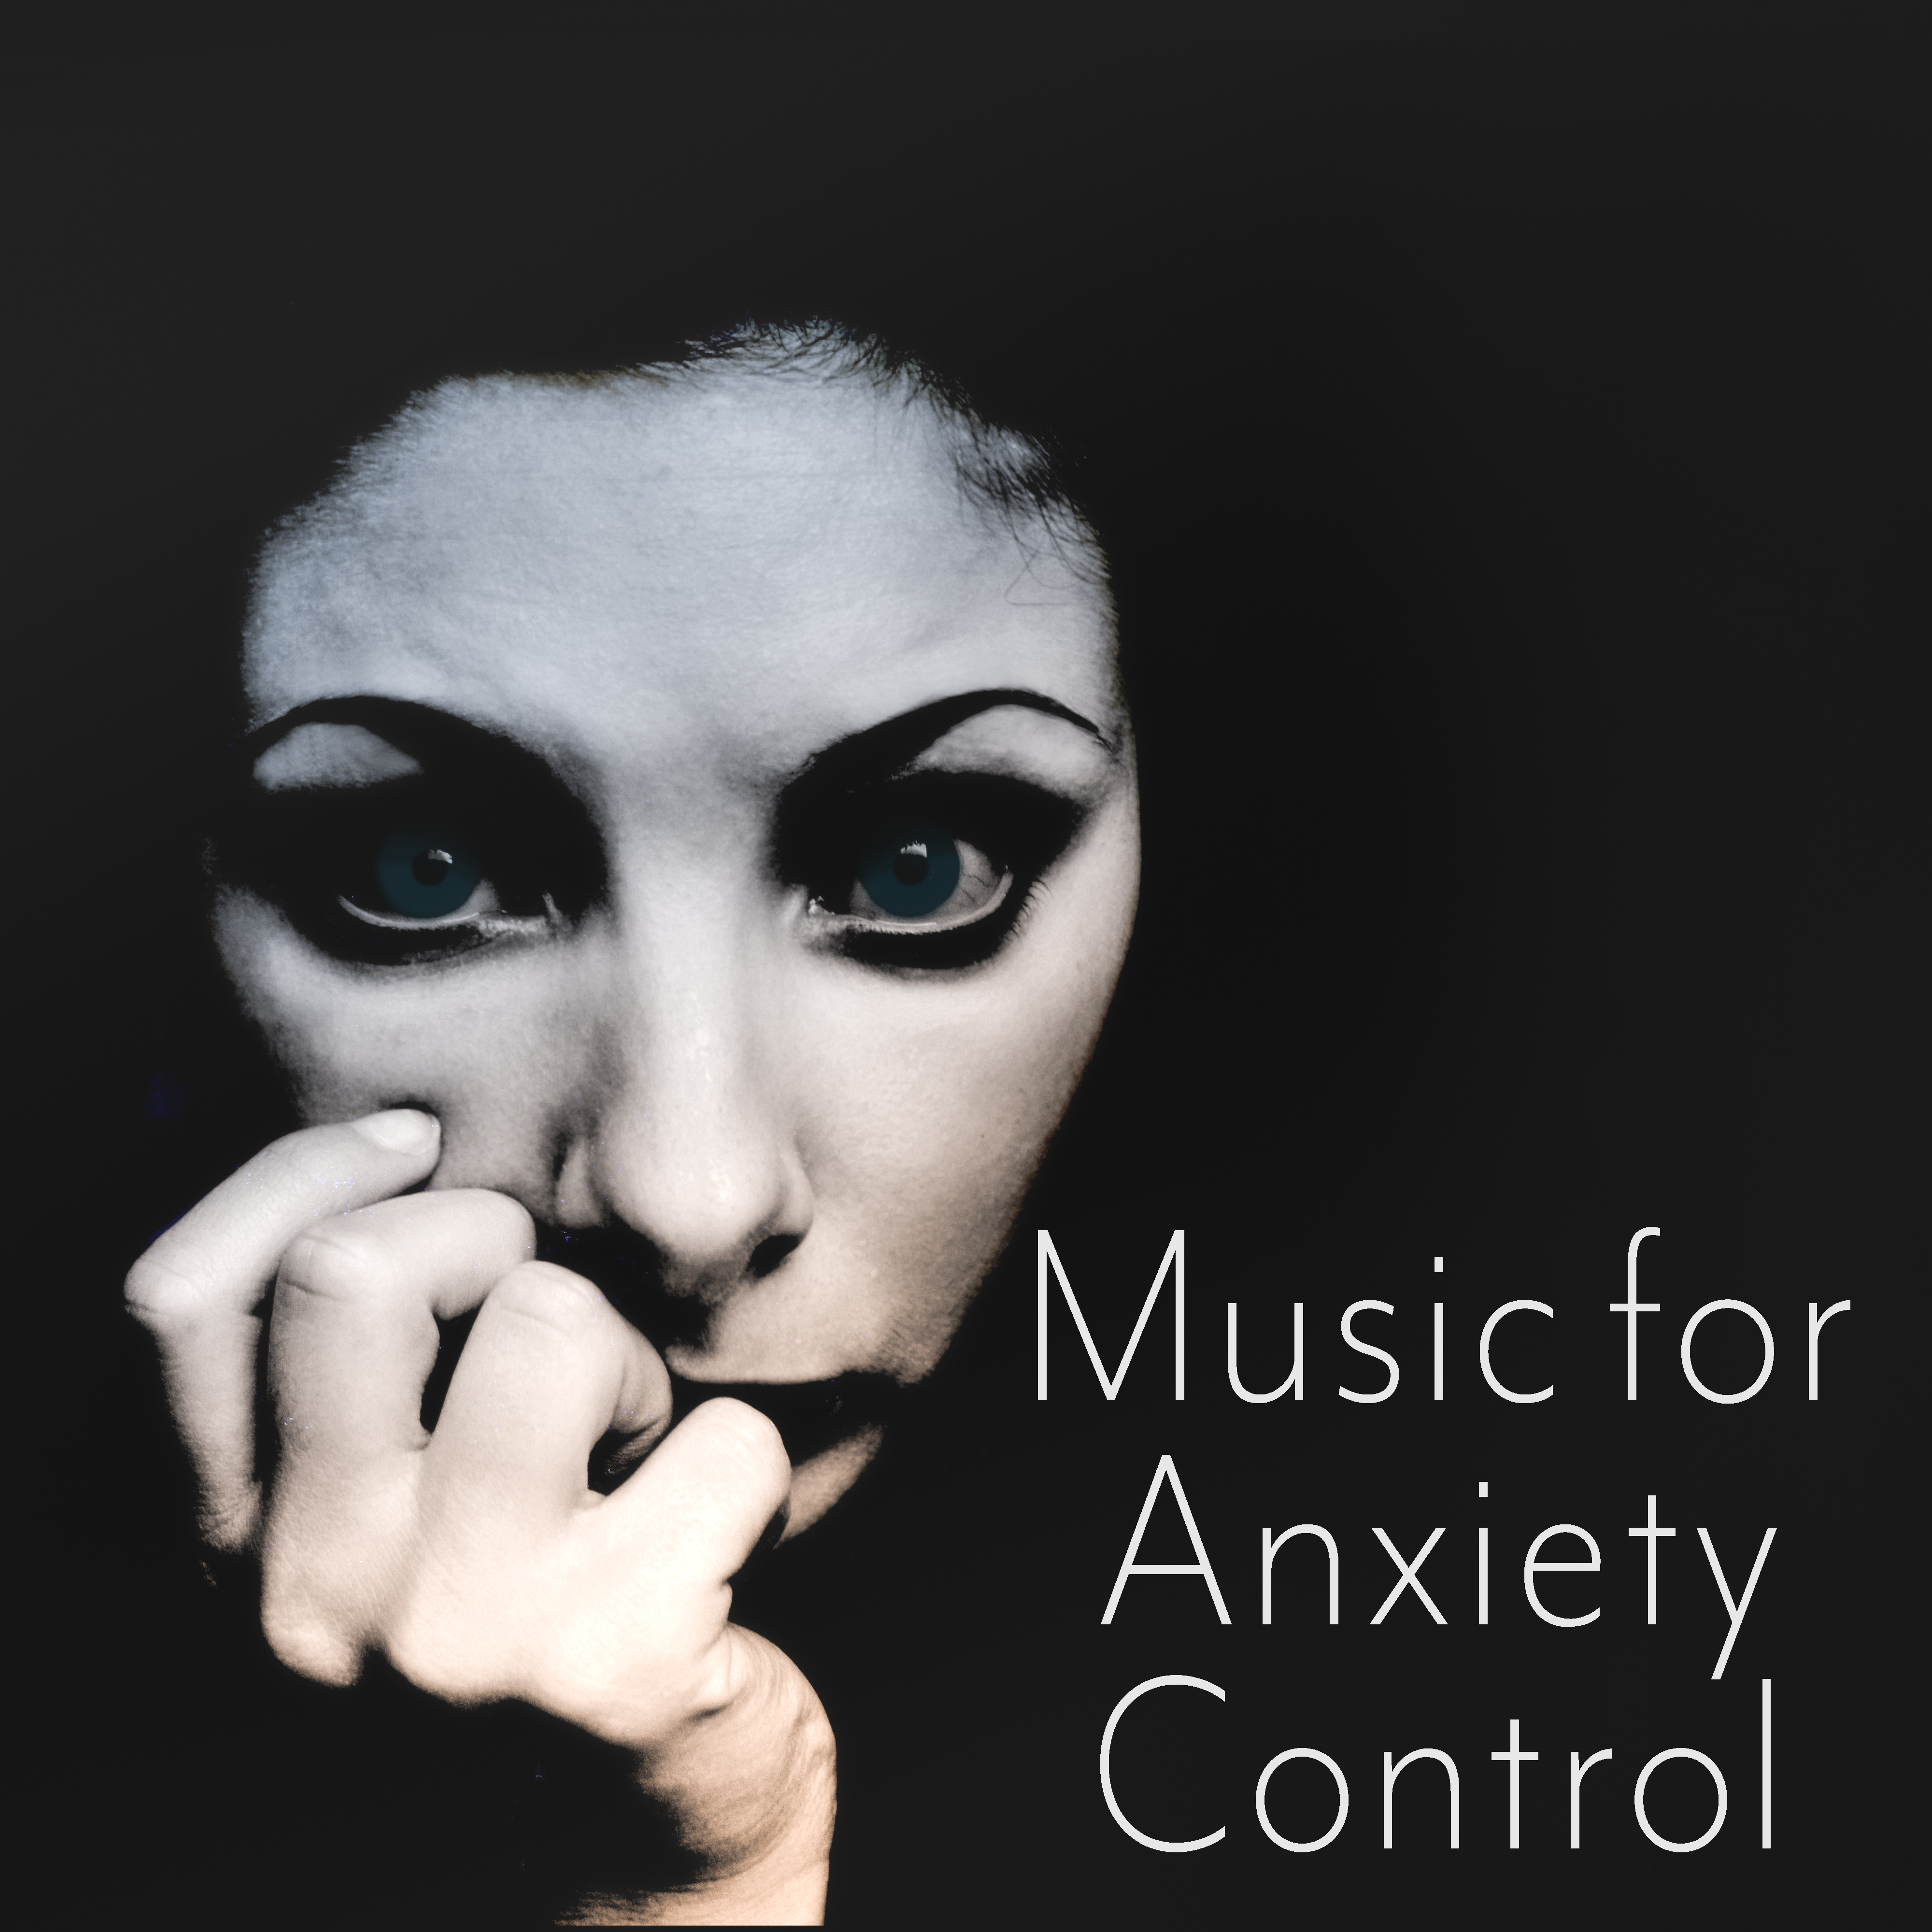 Music for Anxiety Control – Relaxing Music, Helpful for Meditation, Stress Less, Anxiety Control, Deep Meditation